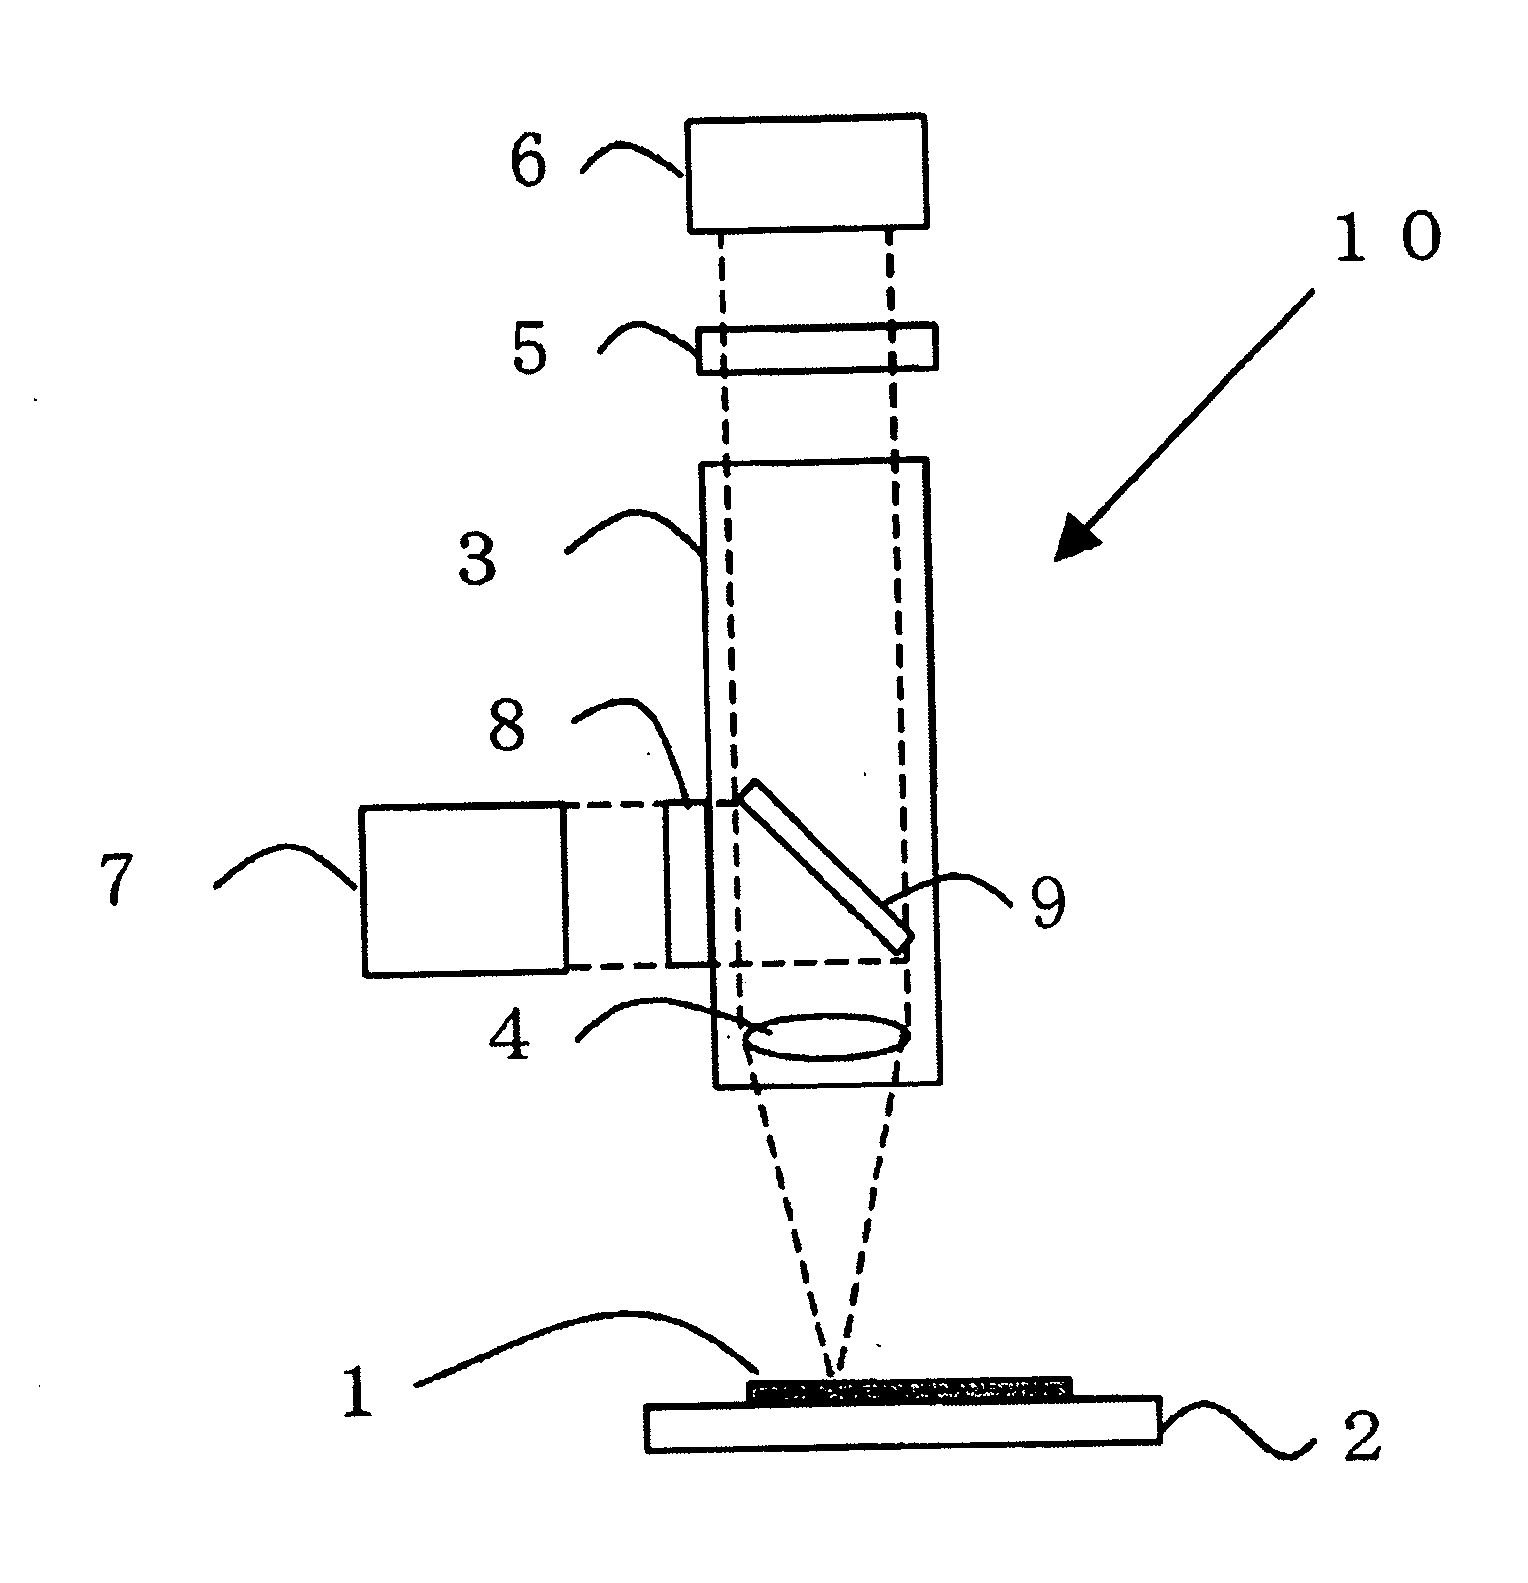 Method of detecting viable cells